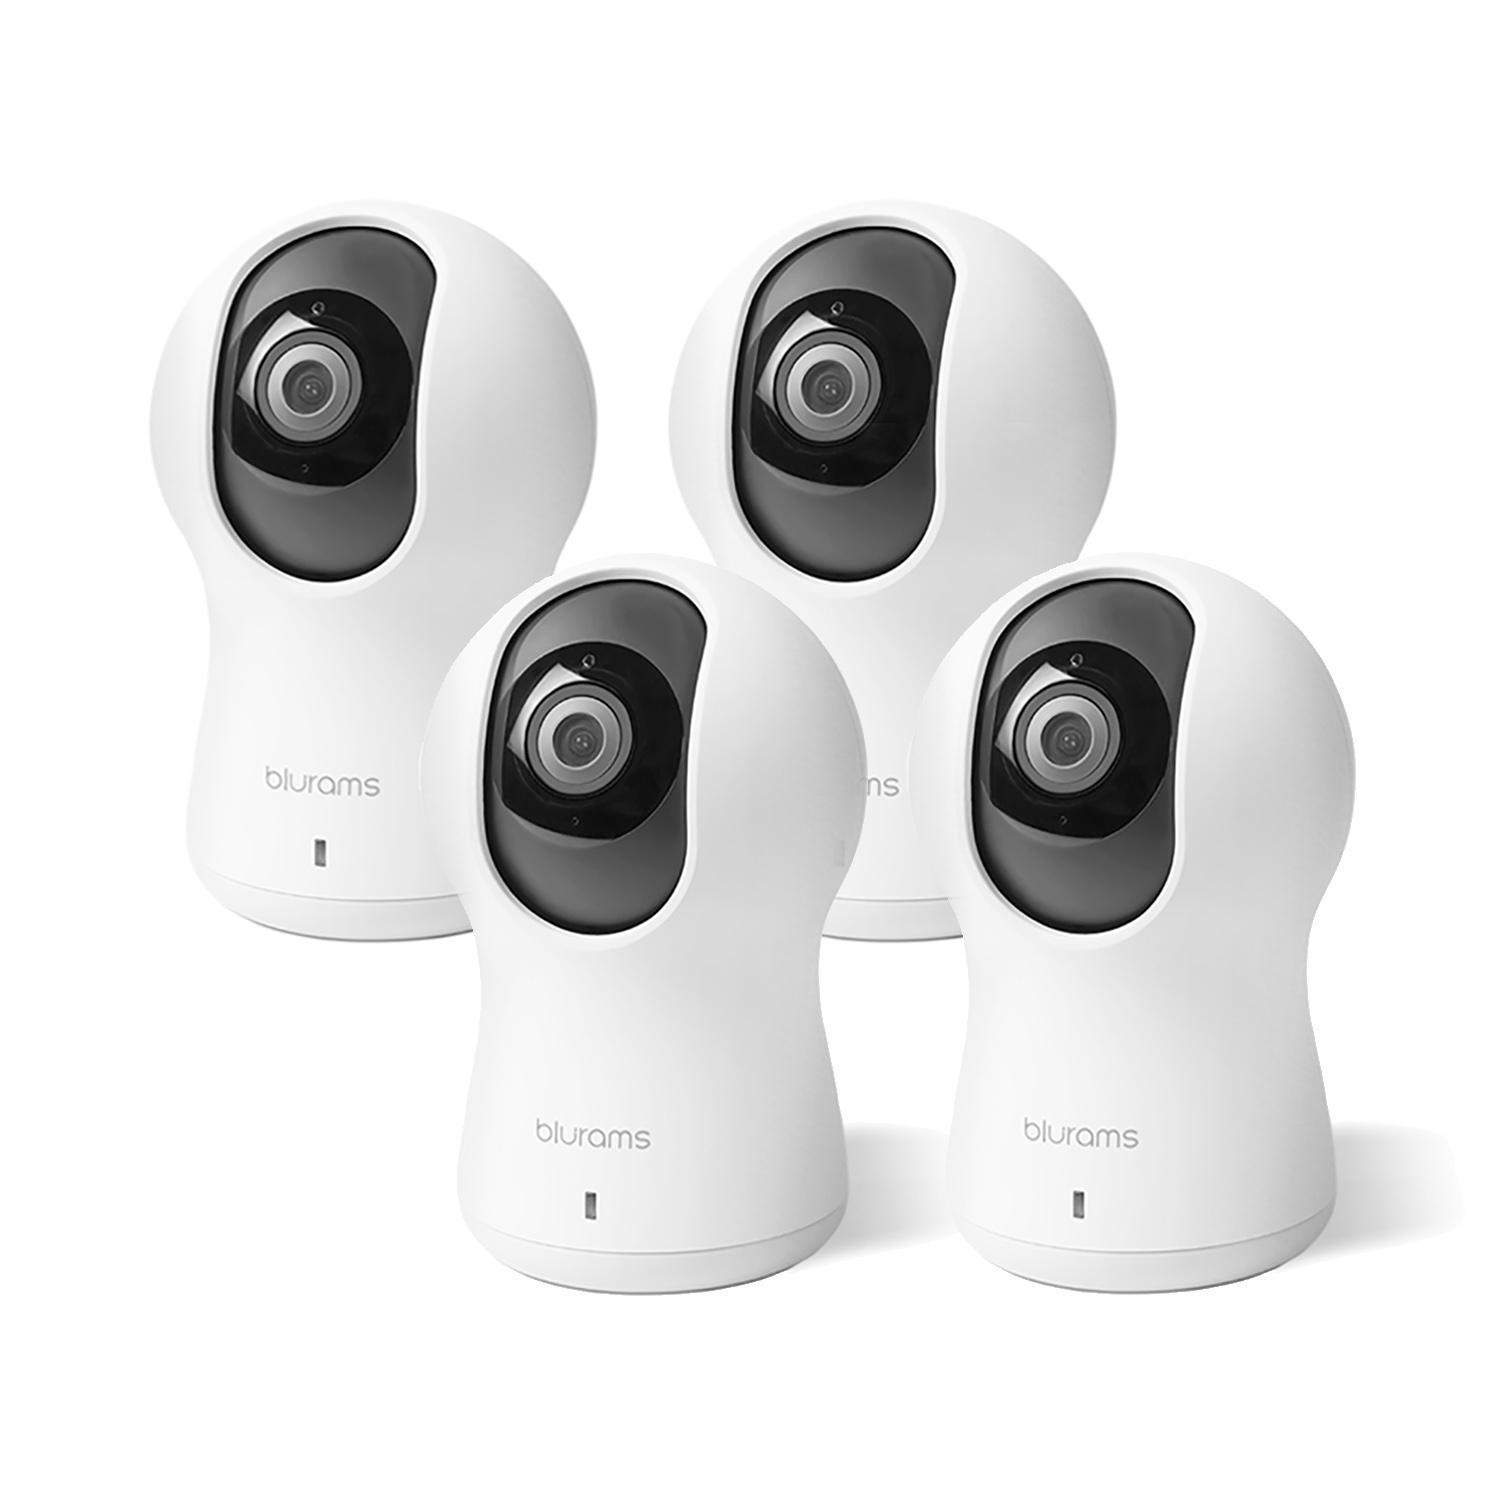 Blurams 720P Dome Lite Security Camera with Motion, Sound Detection, Night Vision, Two-Way Audio - A30 [Pack Of 4] - White